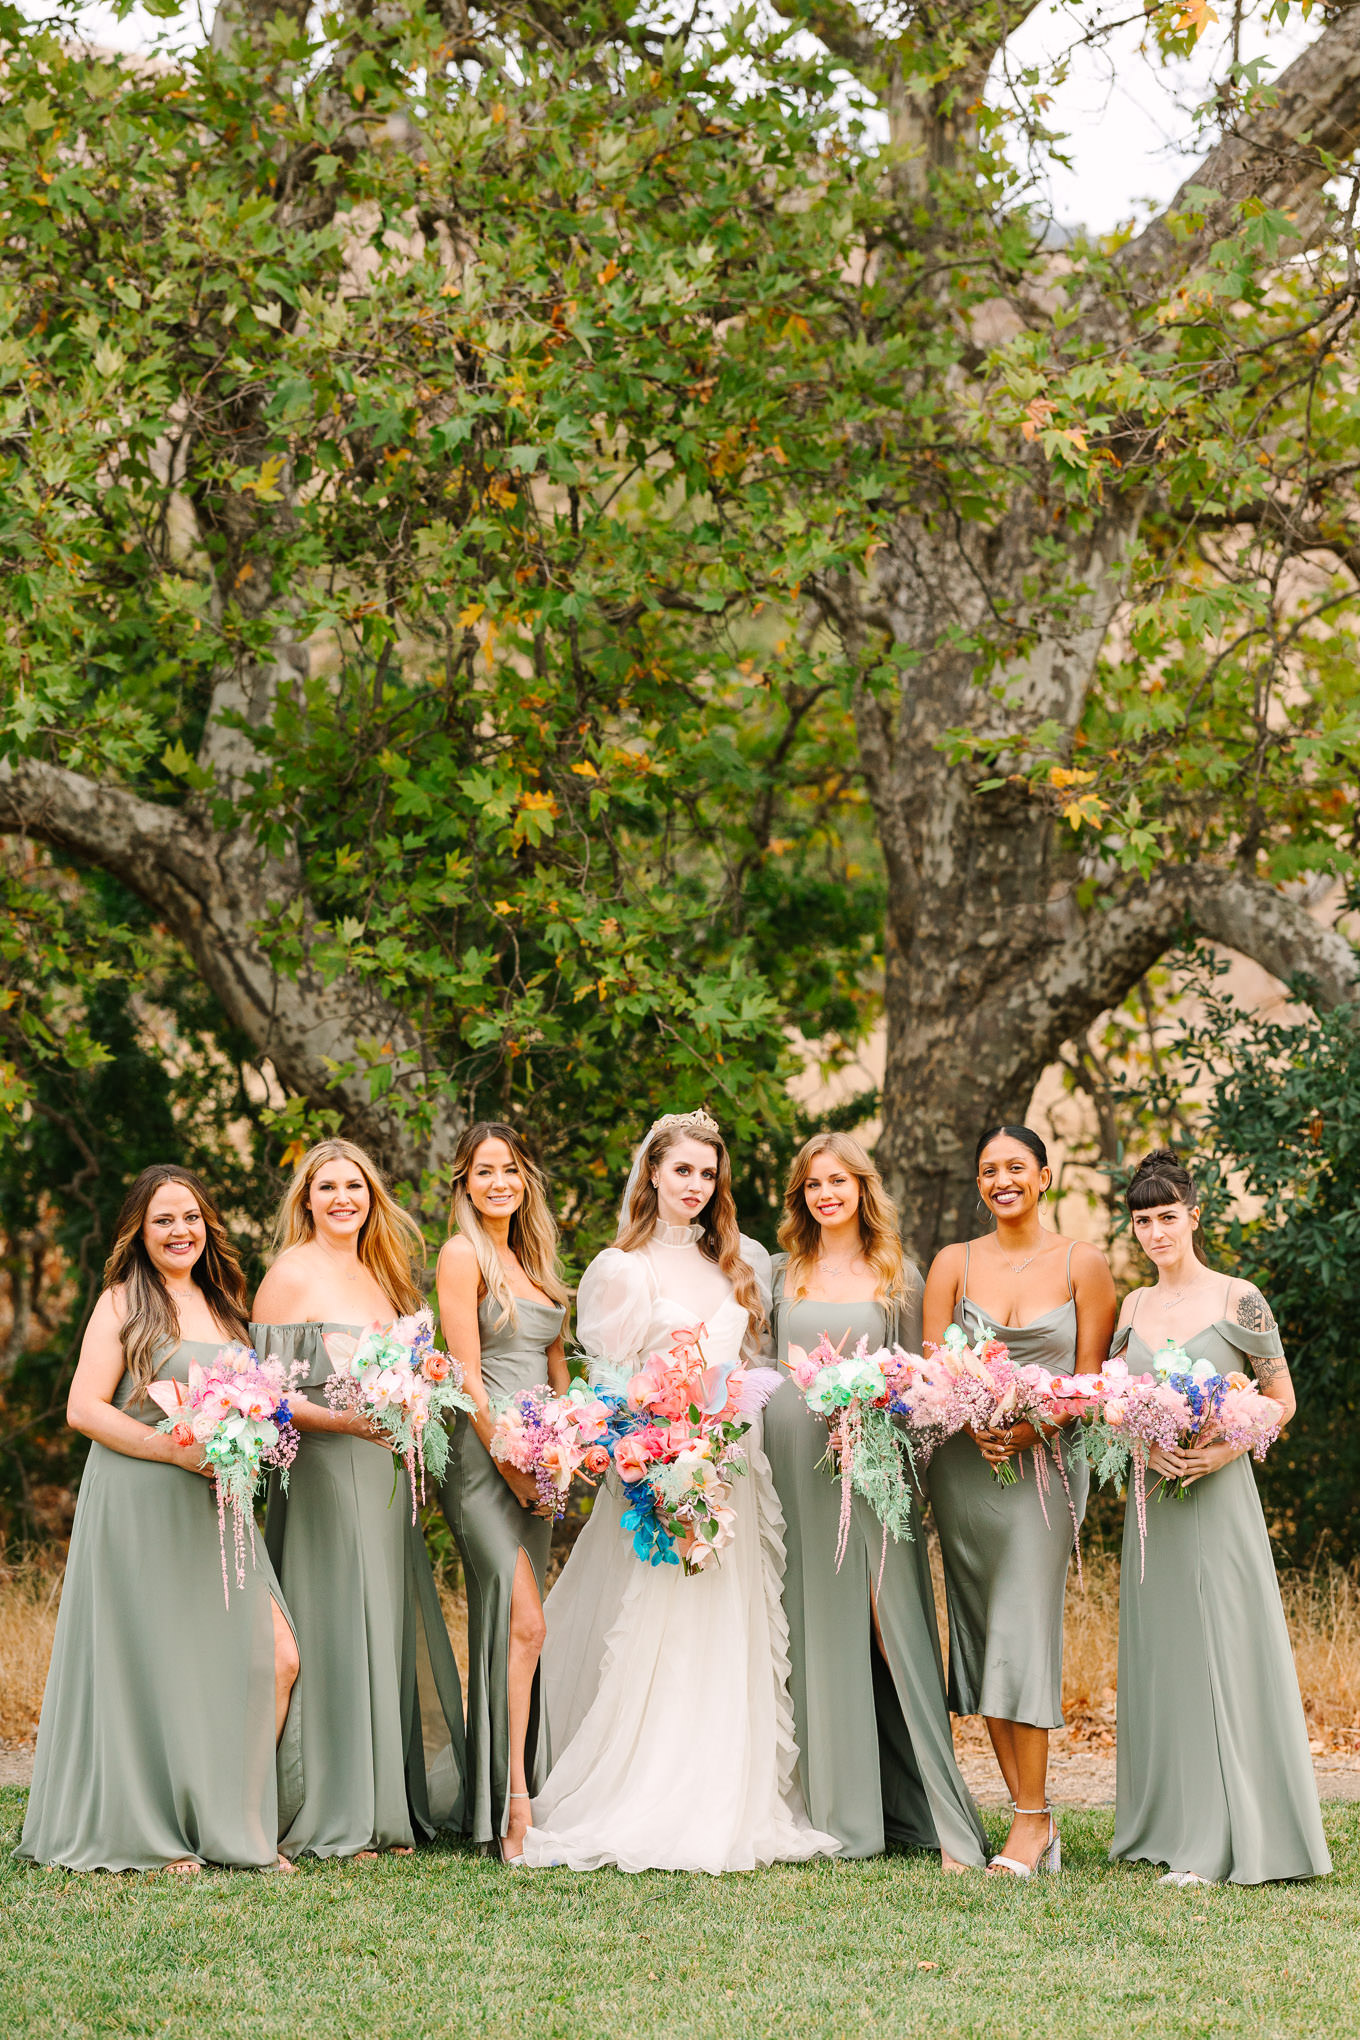 Bridesmaids in sage green gowns with colorful bouquets | Colorful and quirky wedding at Higuera Ranch in San Luis Obispo | #sanluisobispowedding #californiawedding #higueraranch #madonnainn   Source: Mary Costa Photography | Los Angeles